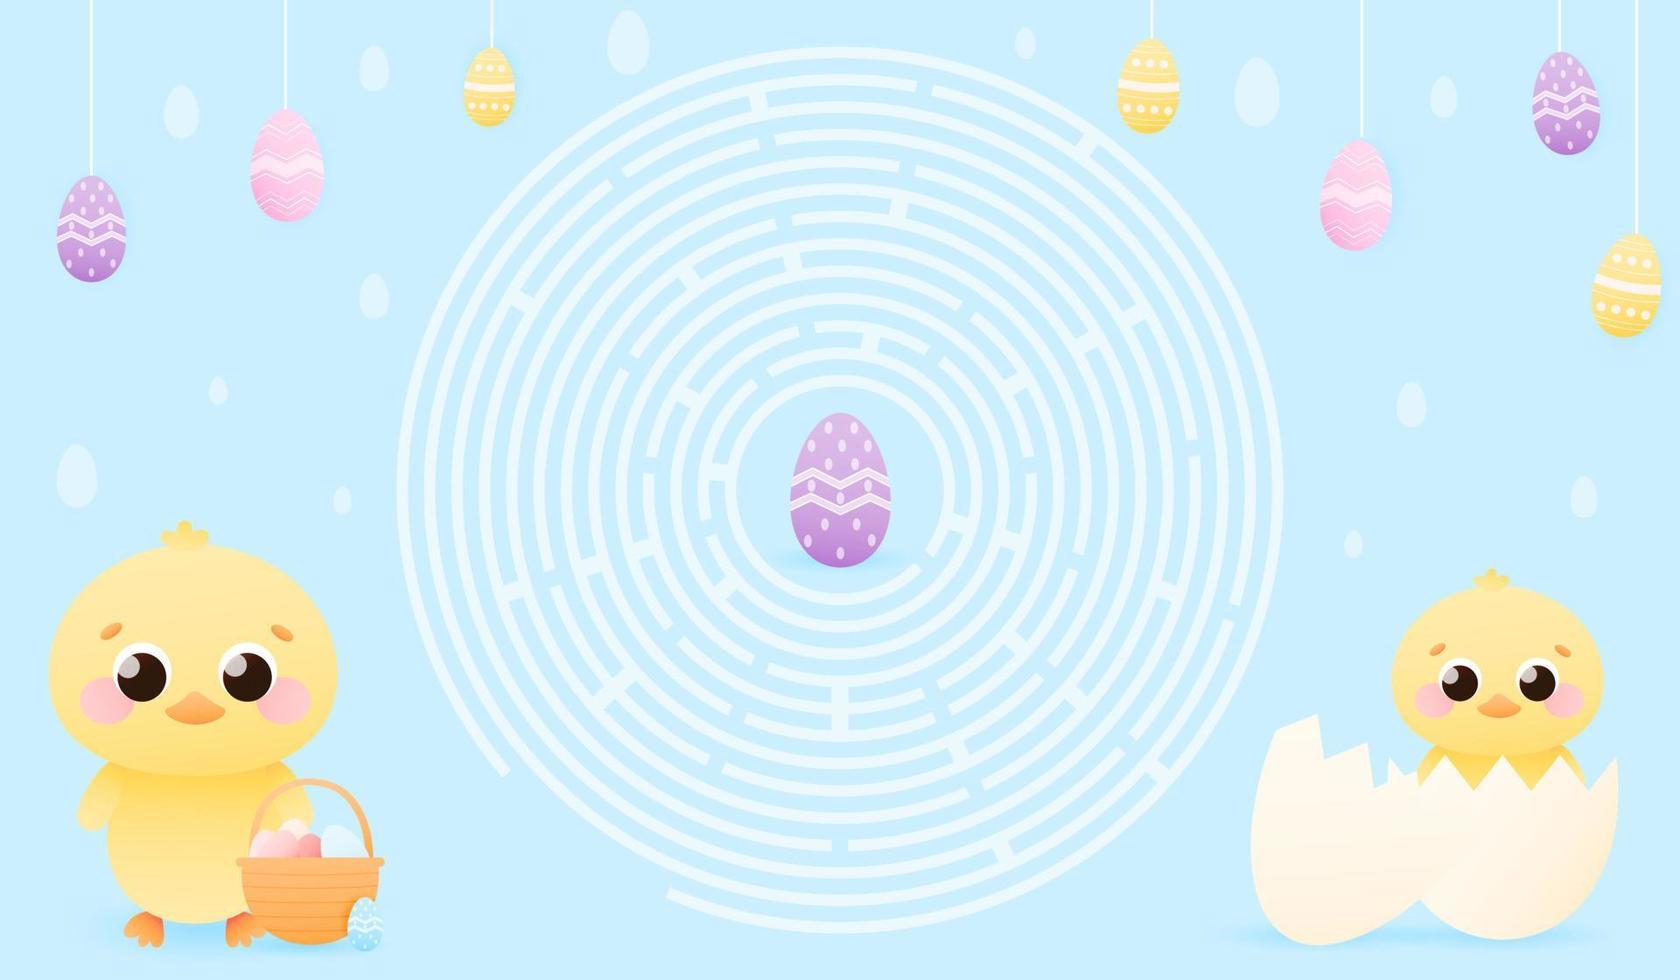 Easy children round labyrinth for books or worksheet, printable school activity, educational riddle for kids, easter concept for maze, cute chick character and painted eggs vector